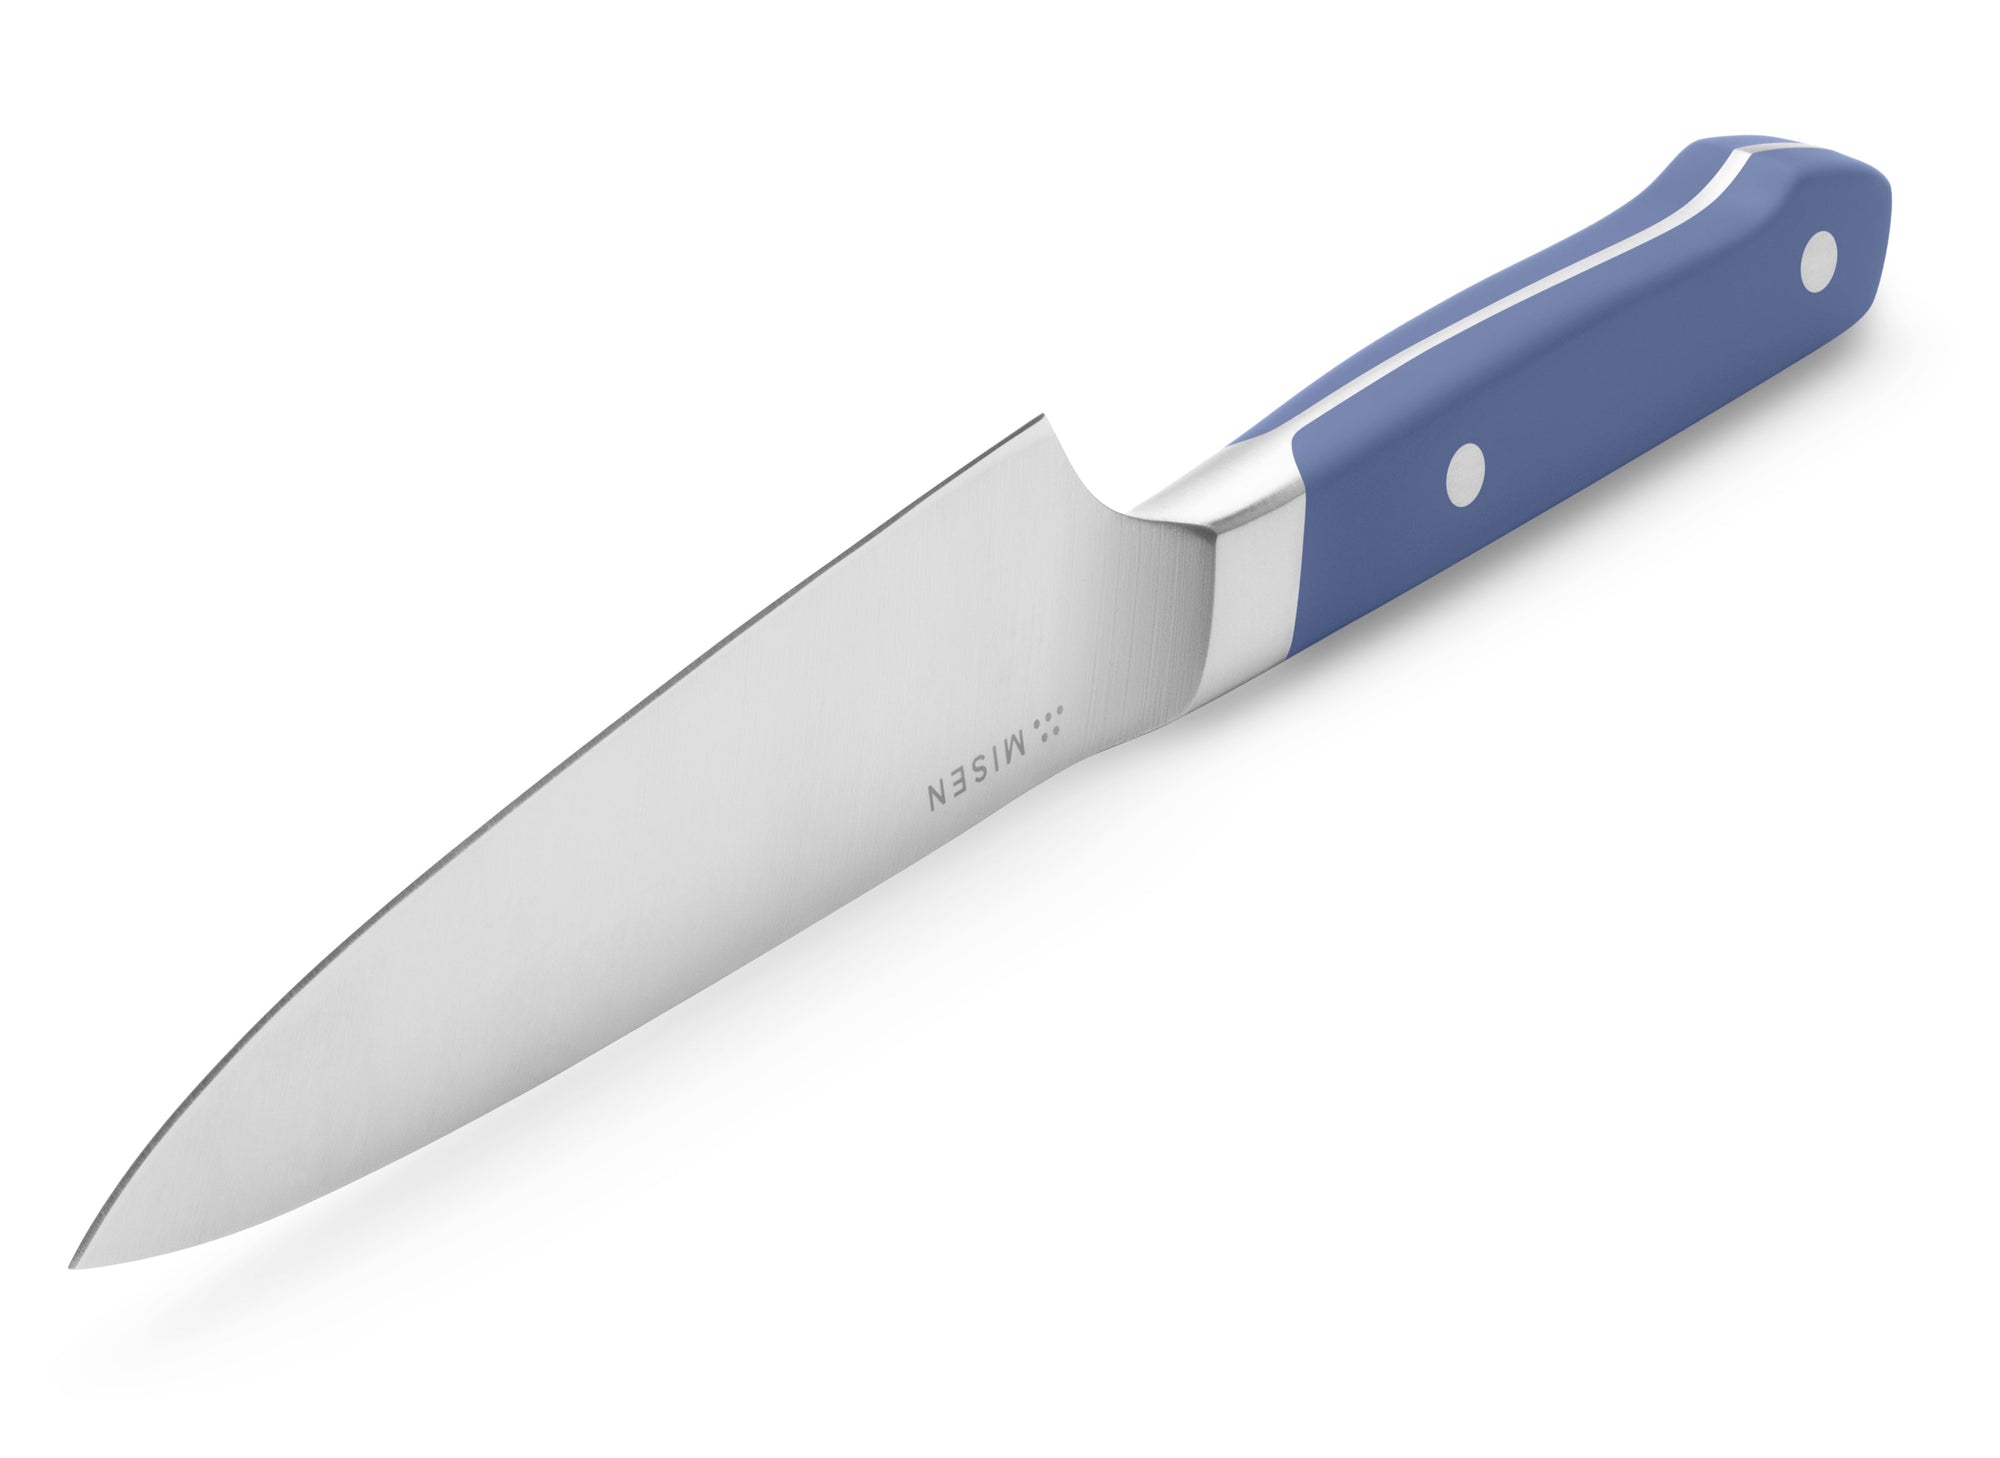 Blade tip and edge of Misen Utility Knife in blue